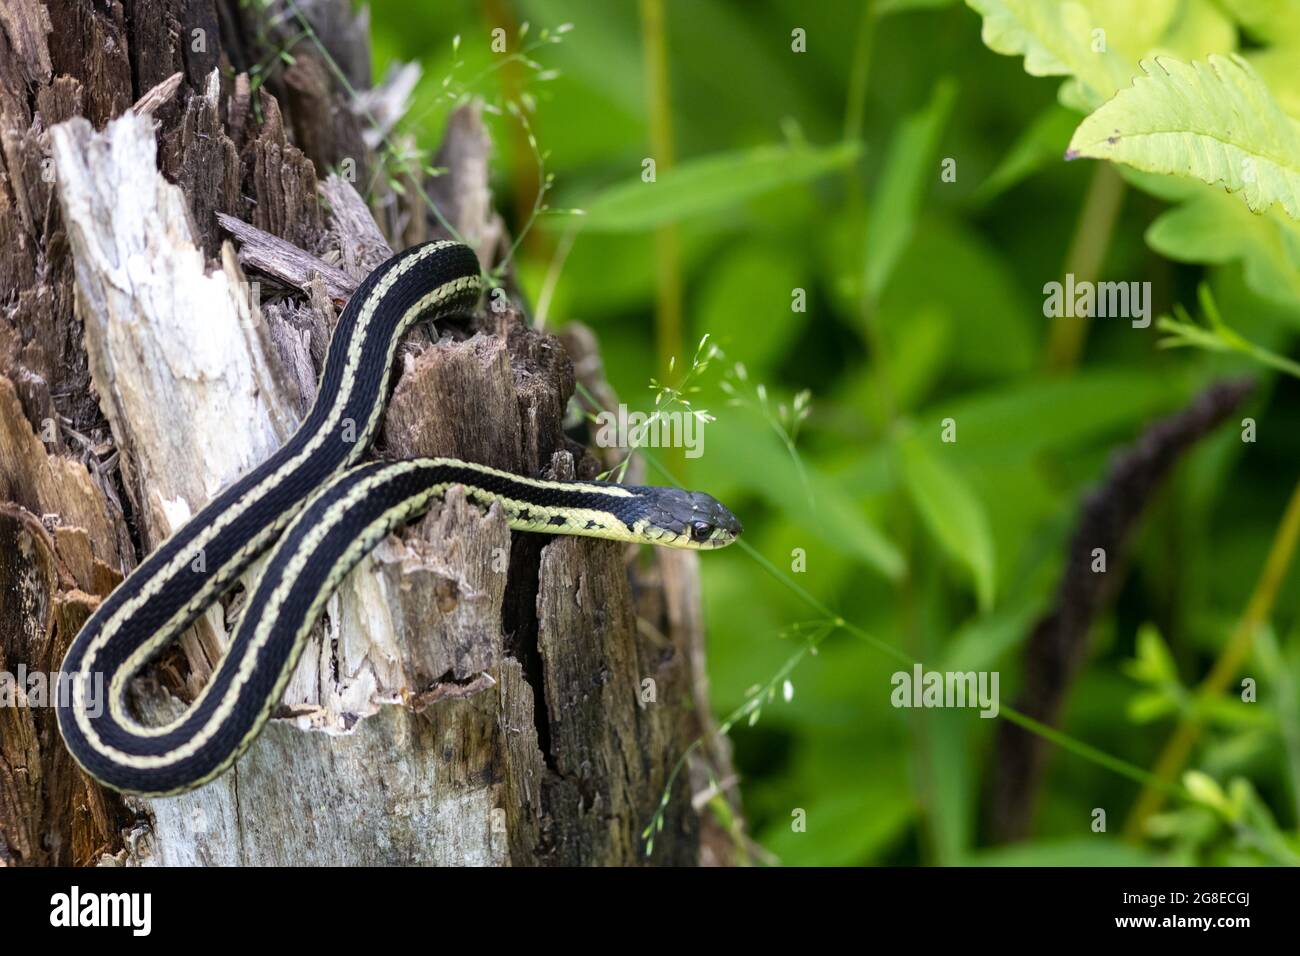 A common garter snake (Thamnophis sirtalis) has curved its body where it rests on top of a tree stump with cracked bark and wood at its top. Stock Photo